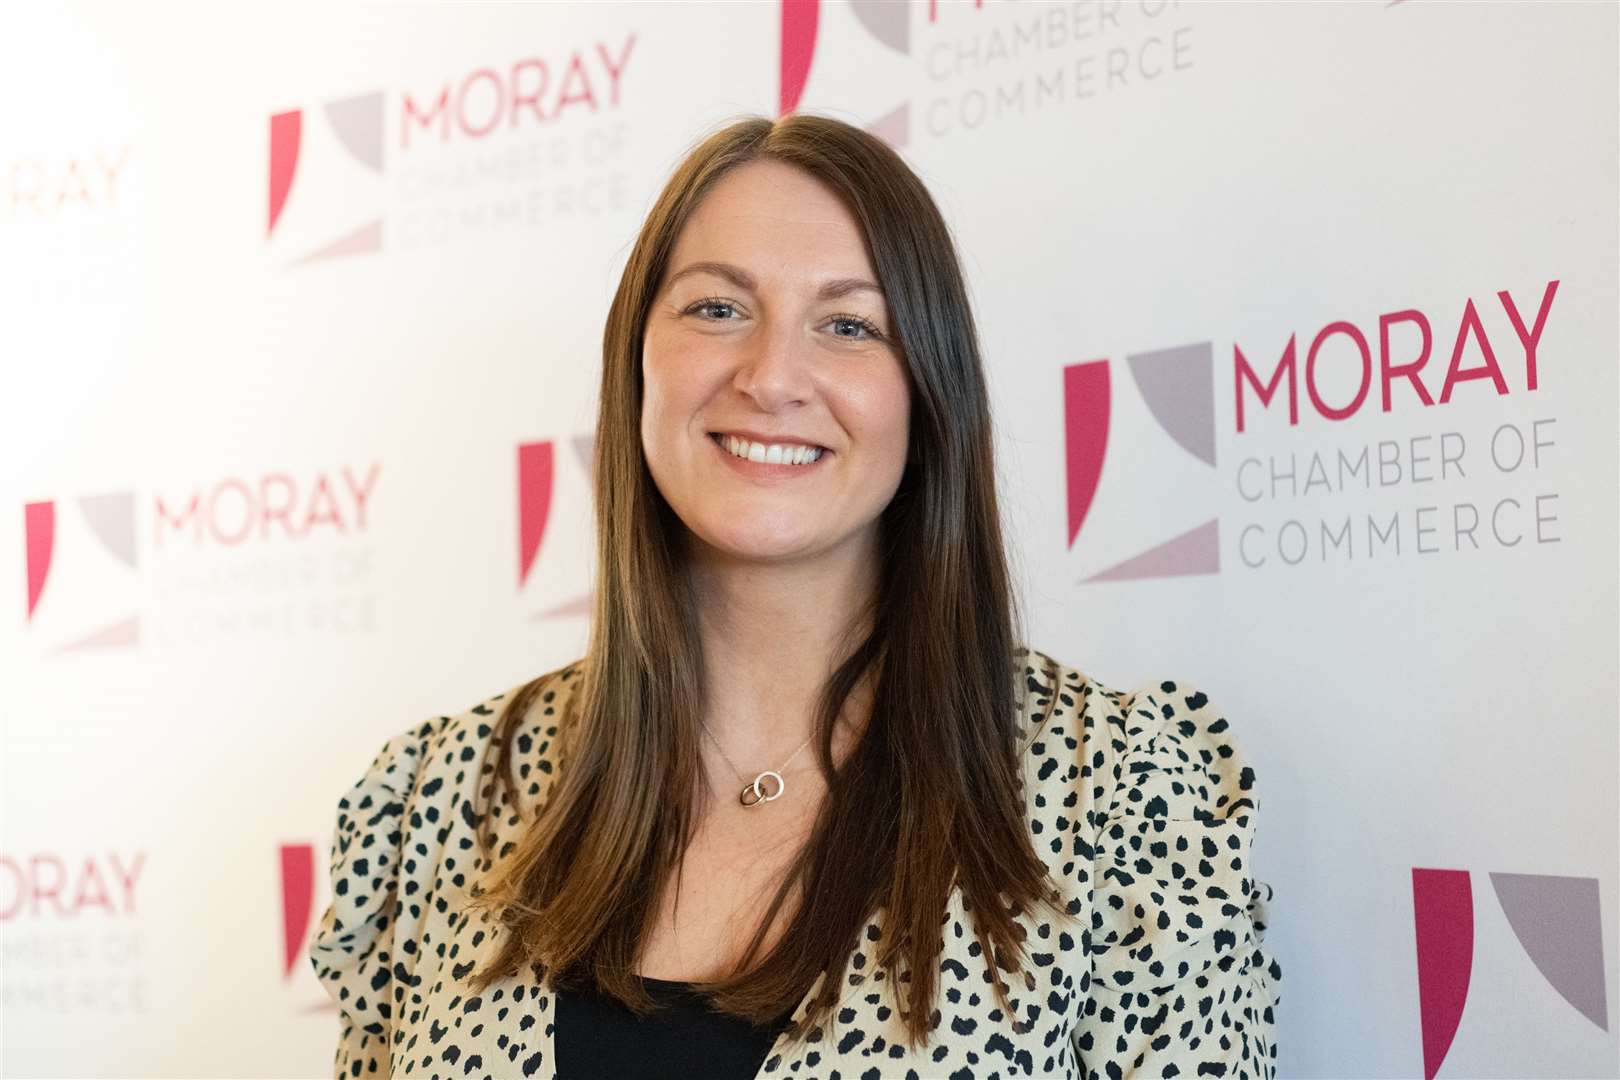 Chief Executive Officer of Moray Chamber of Commerce Sarah Medcraf. Picture: Daniel Forsyth